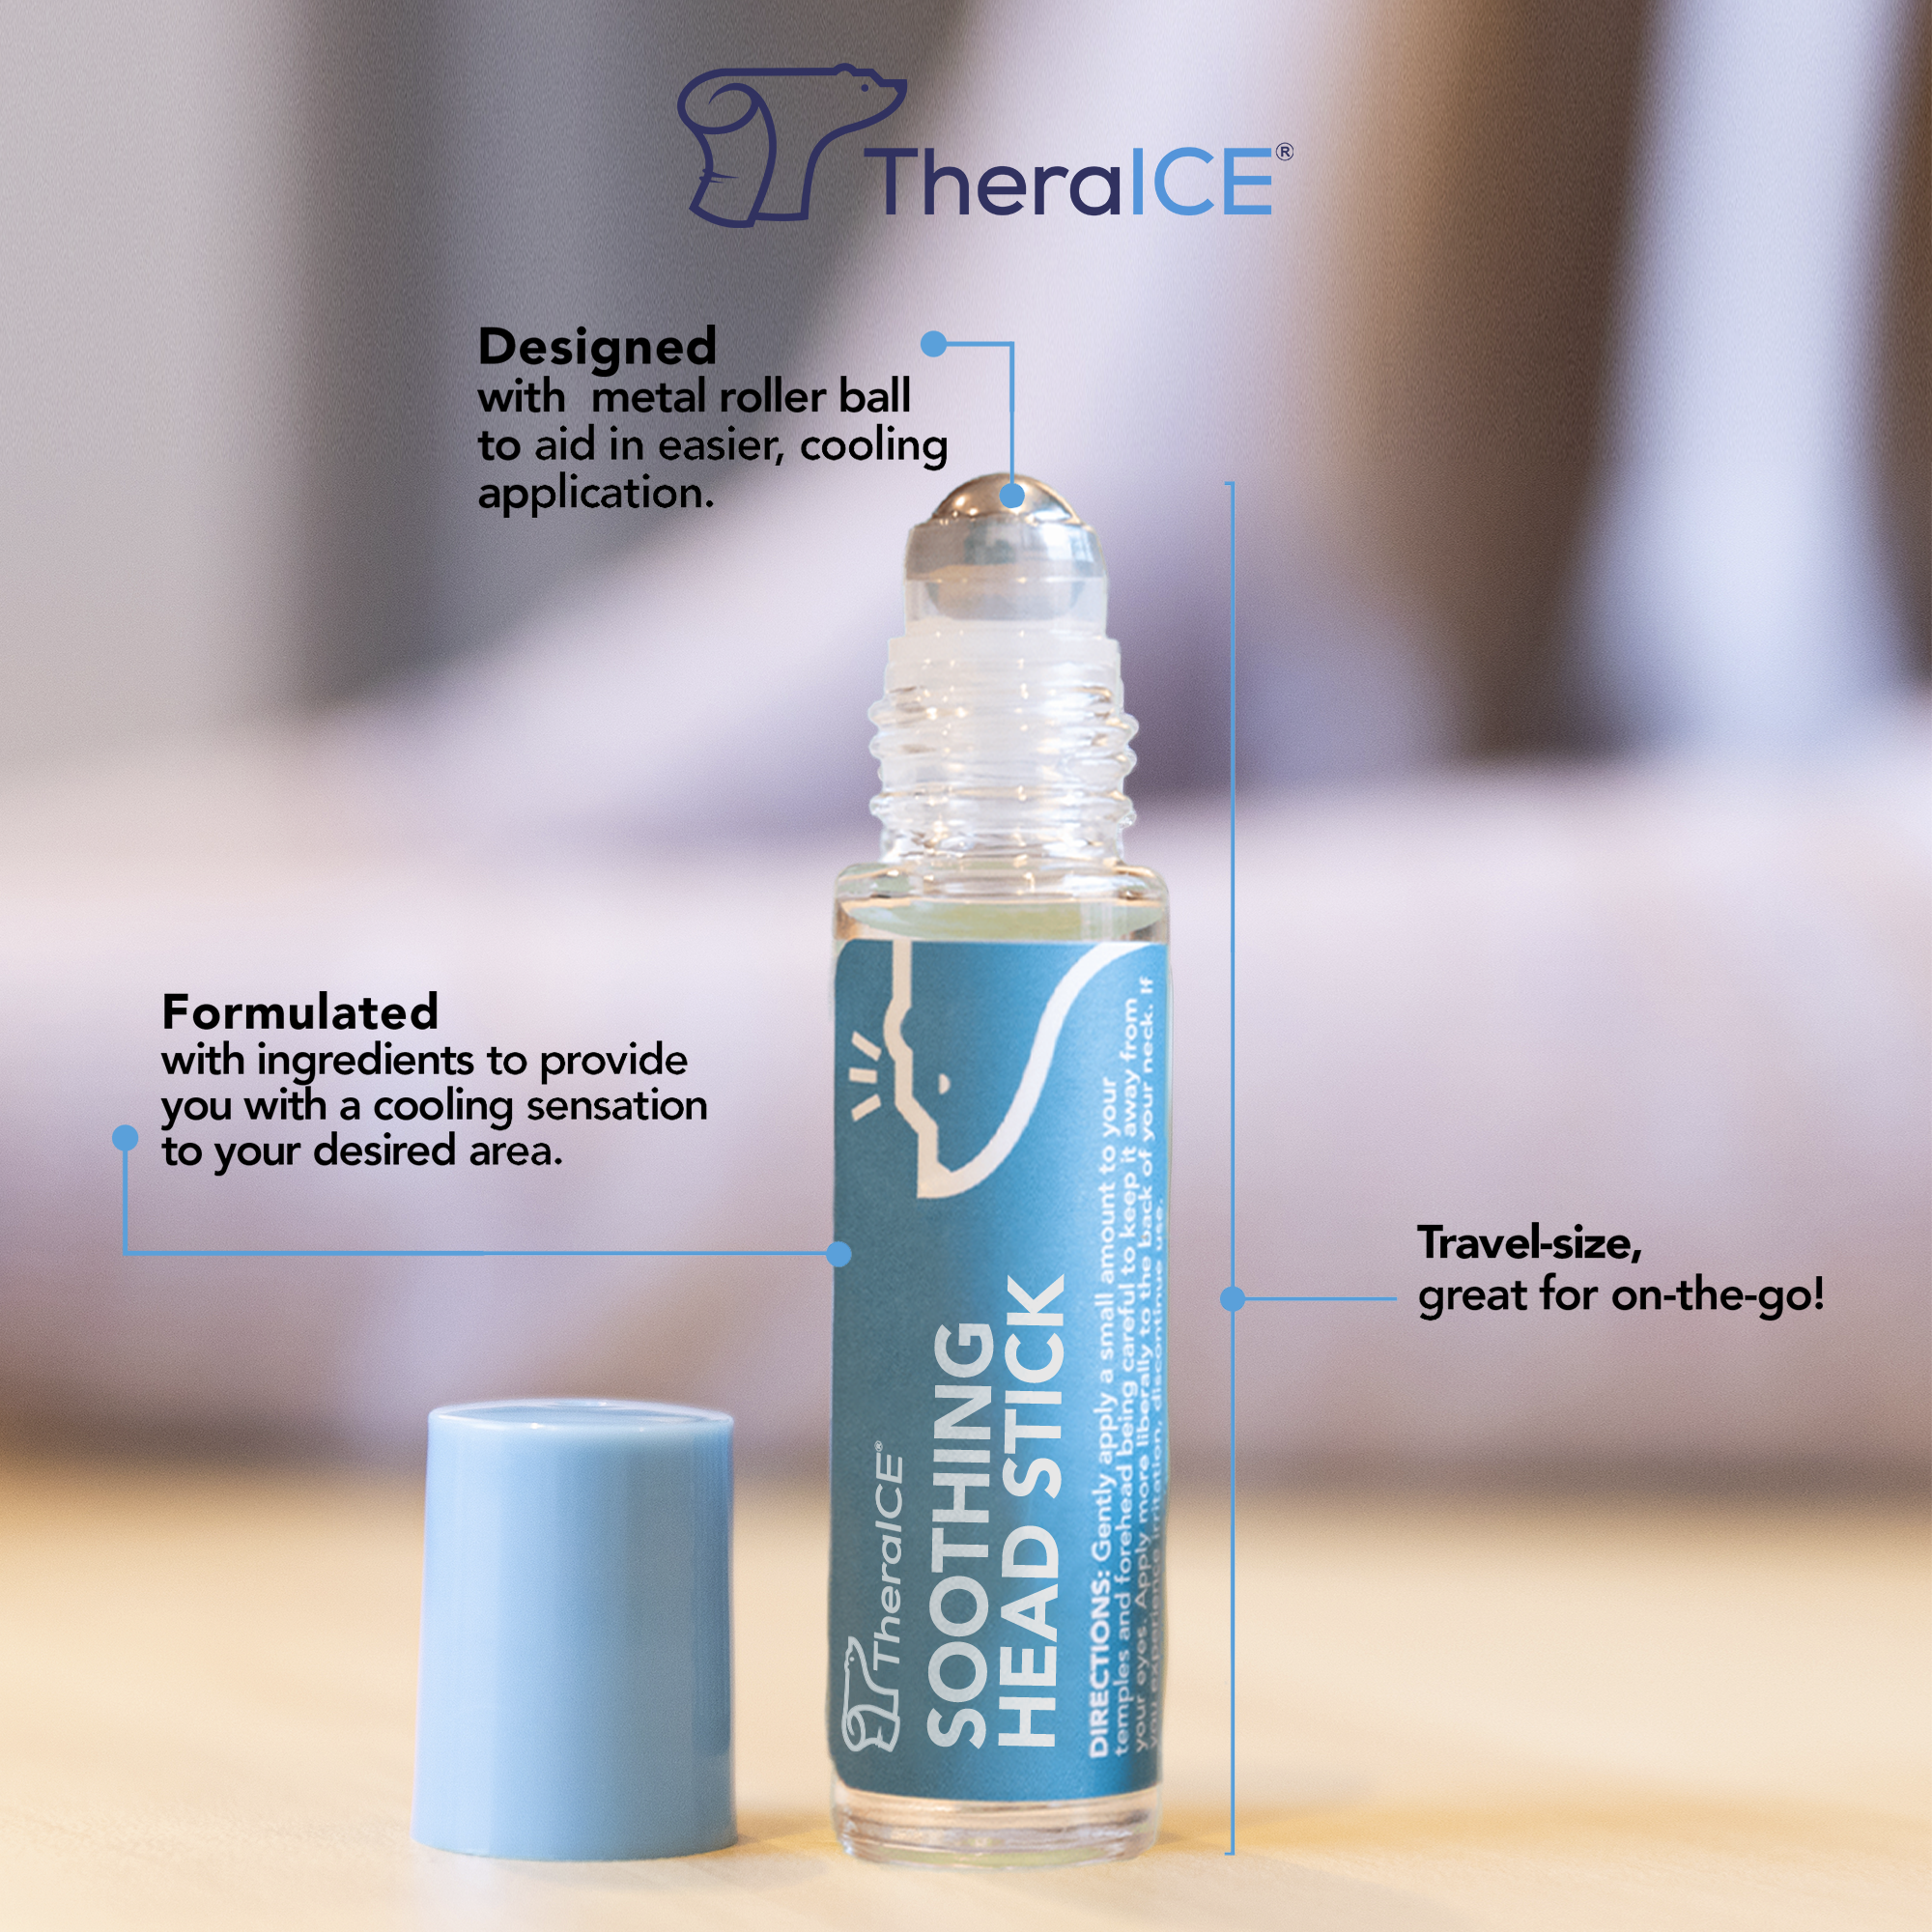 TheraICE Soothing Head Stick